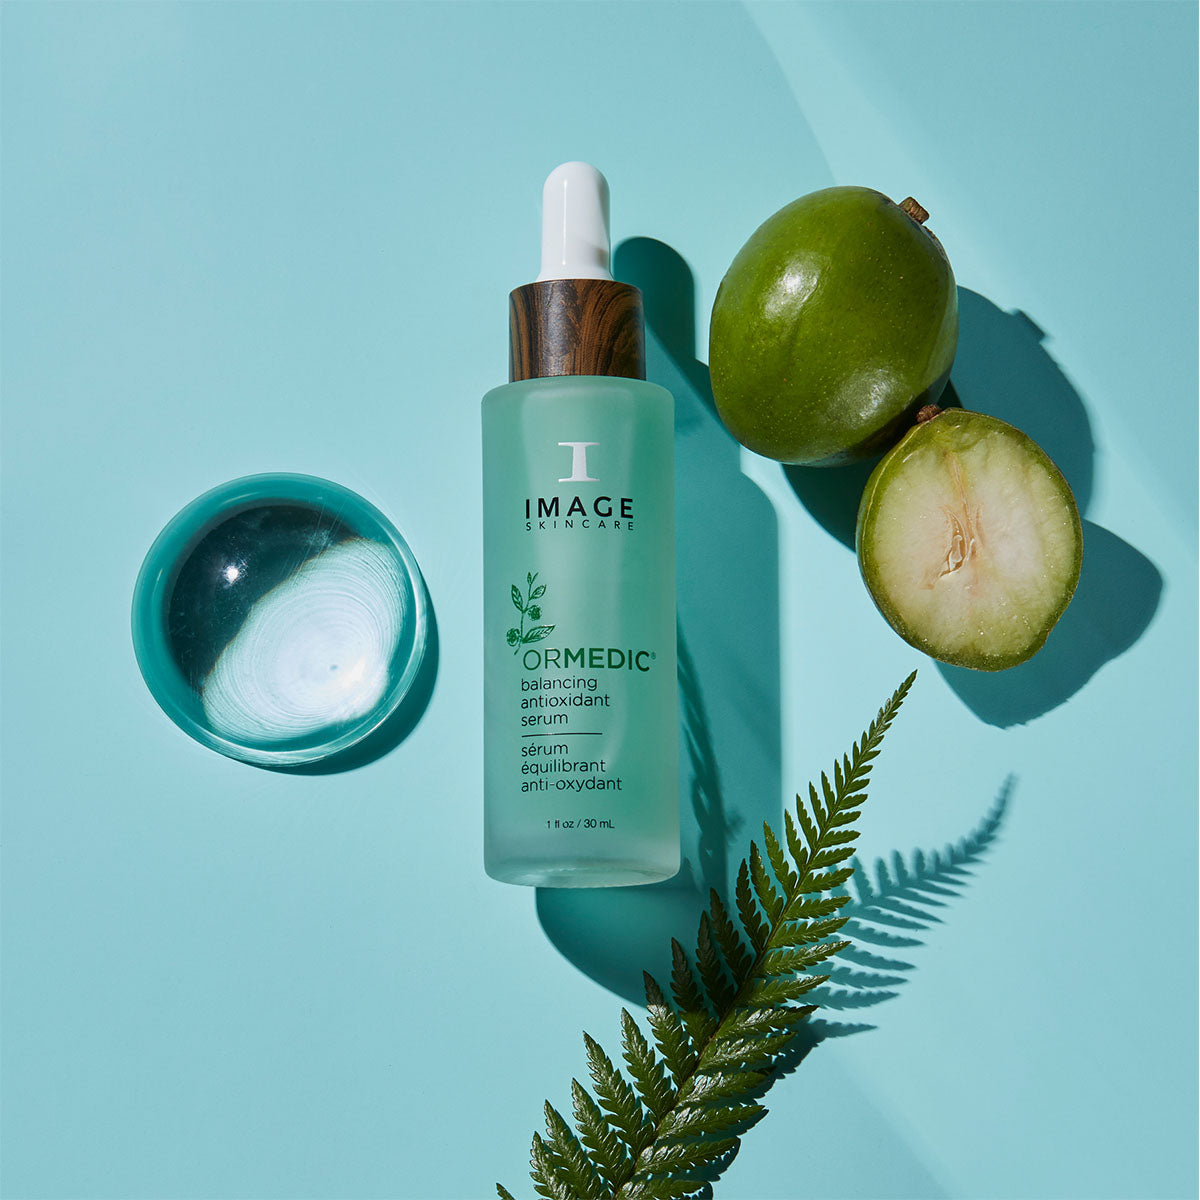 Image Skincare ORMEDIC antioxidant serum is made with aloe vera, vitamin c, and botanical extracts.